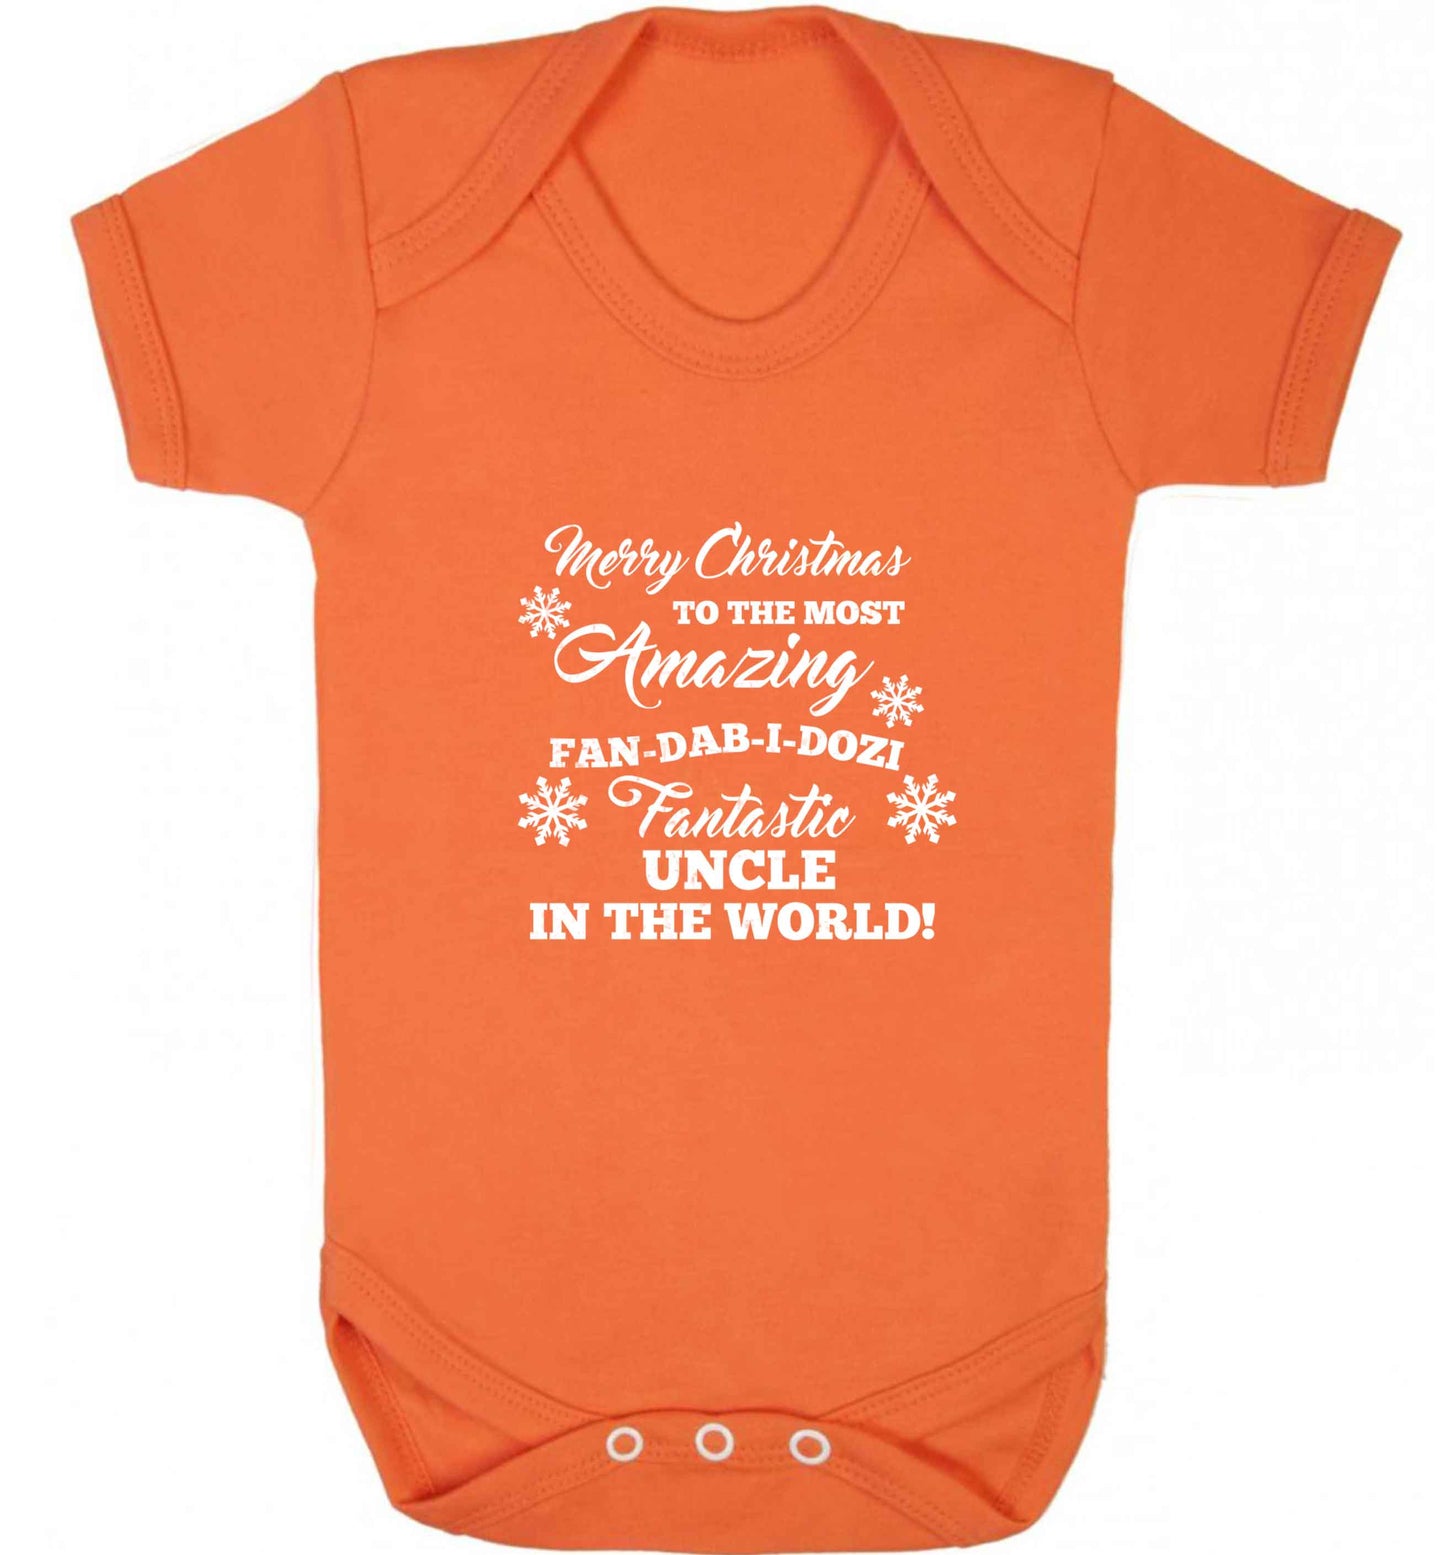 Merry Christmas to the most amazing fan-dab-i-dozi fantasic Uncle in the world baby vest orange 18-24 months